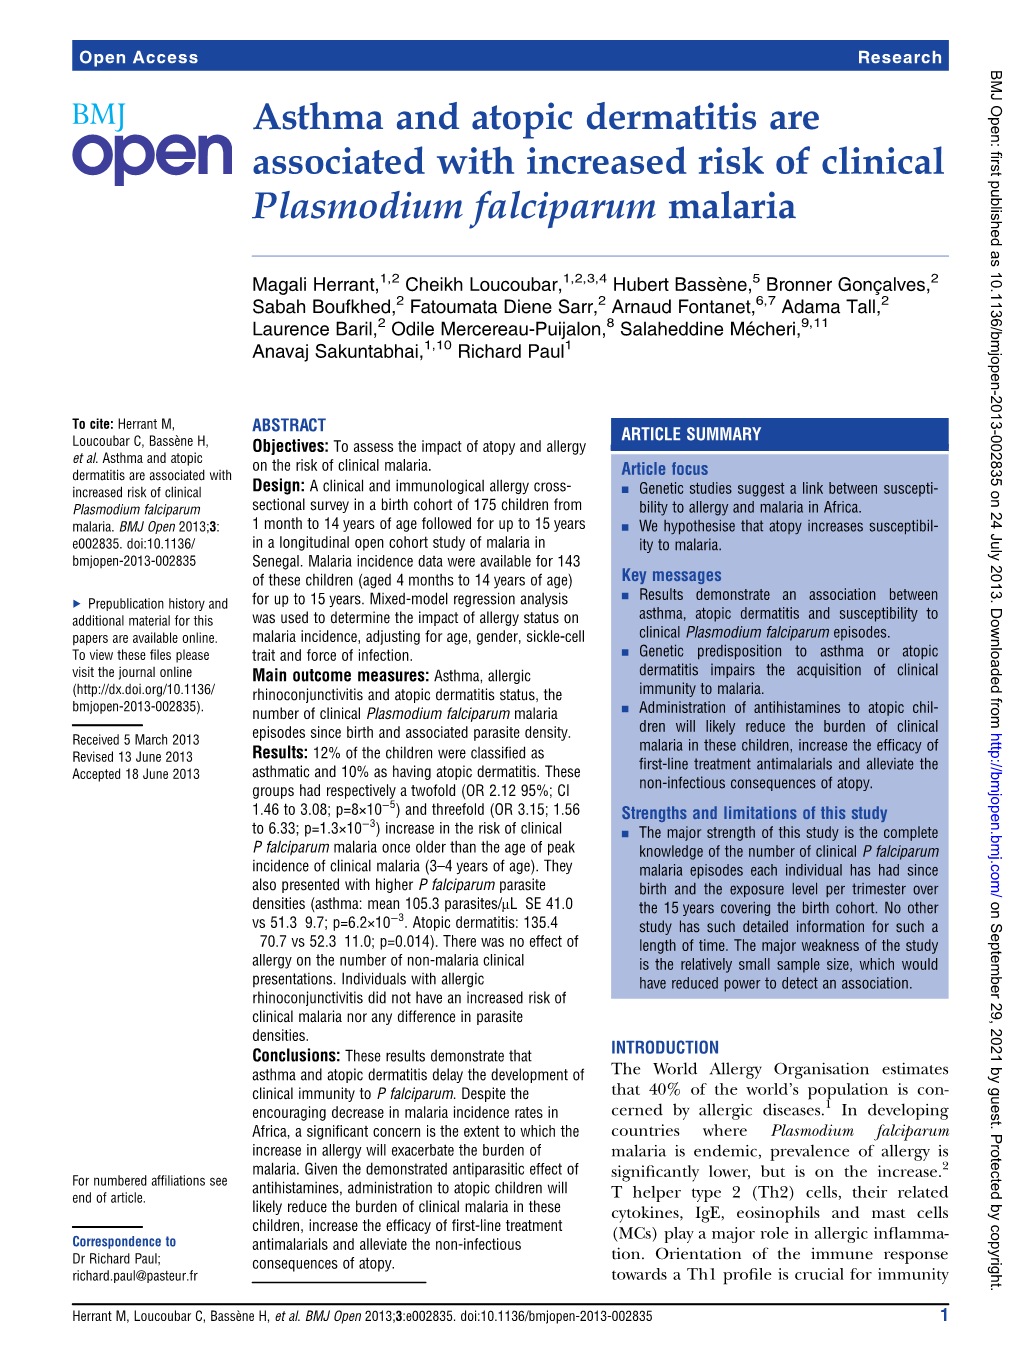 Asthma and Atopic Dermatitis Are Associated with Increased Risk of Clinical Plasmodium Falciparum Malaria